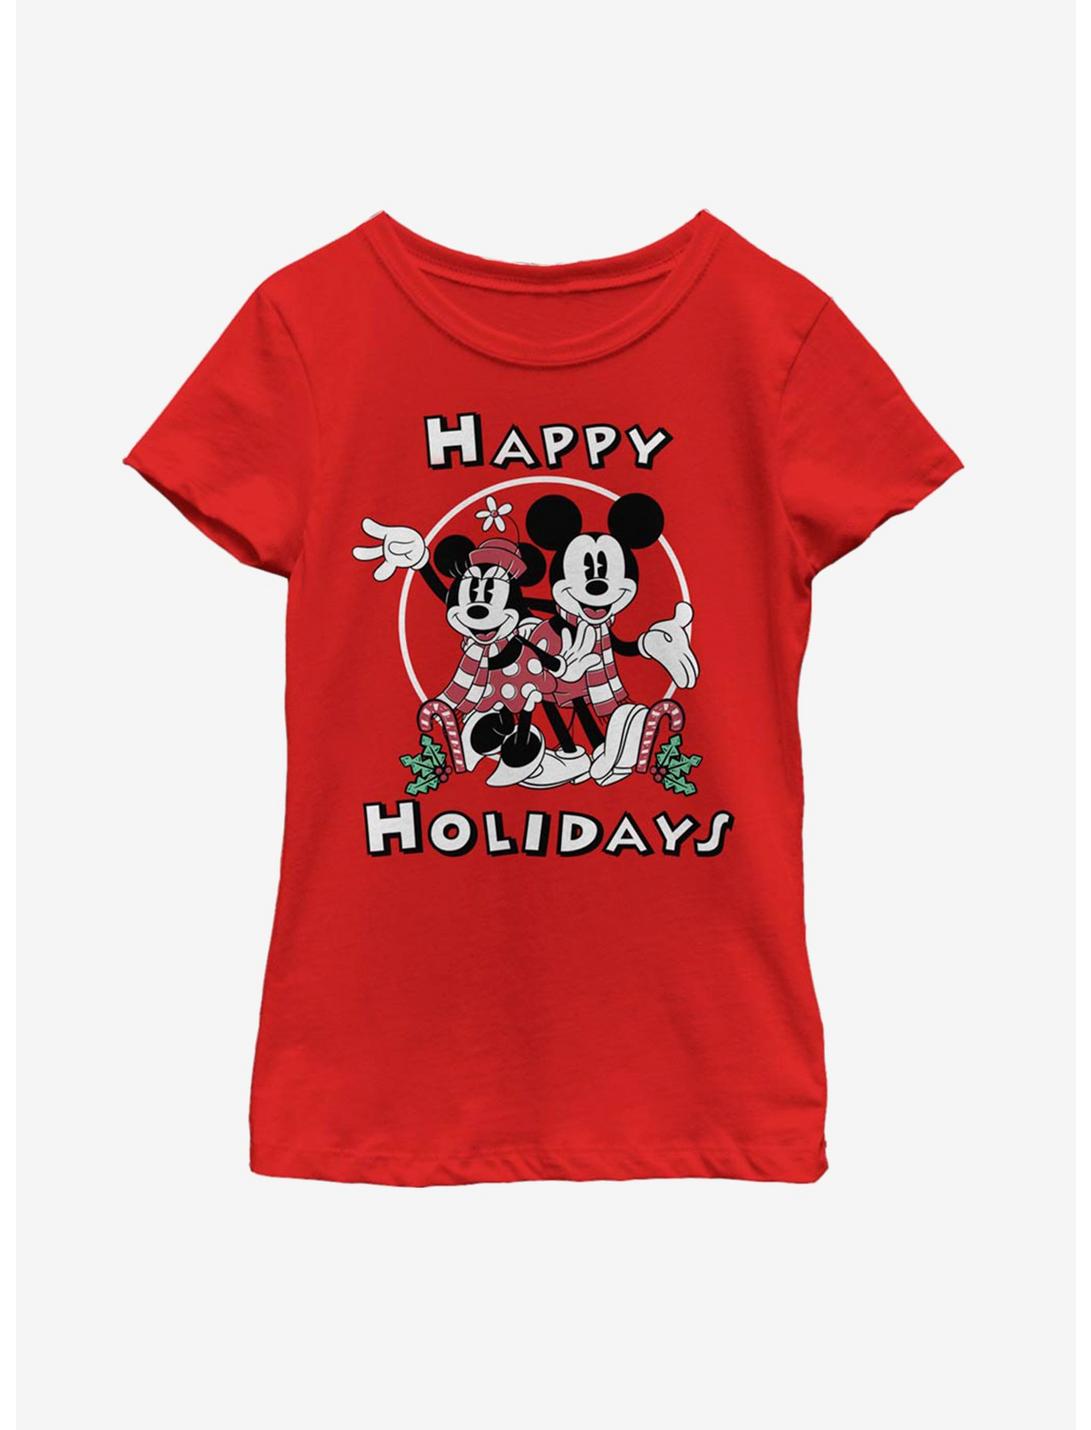 Disney Mickey Mouse & Minnie Holiday Youth Girls T-Shirt, RED, hi-res